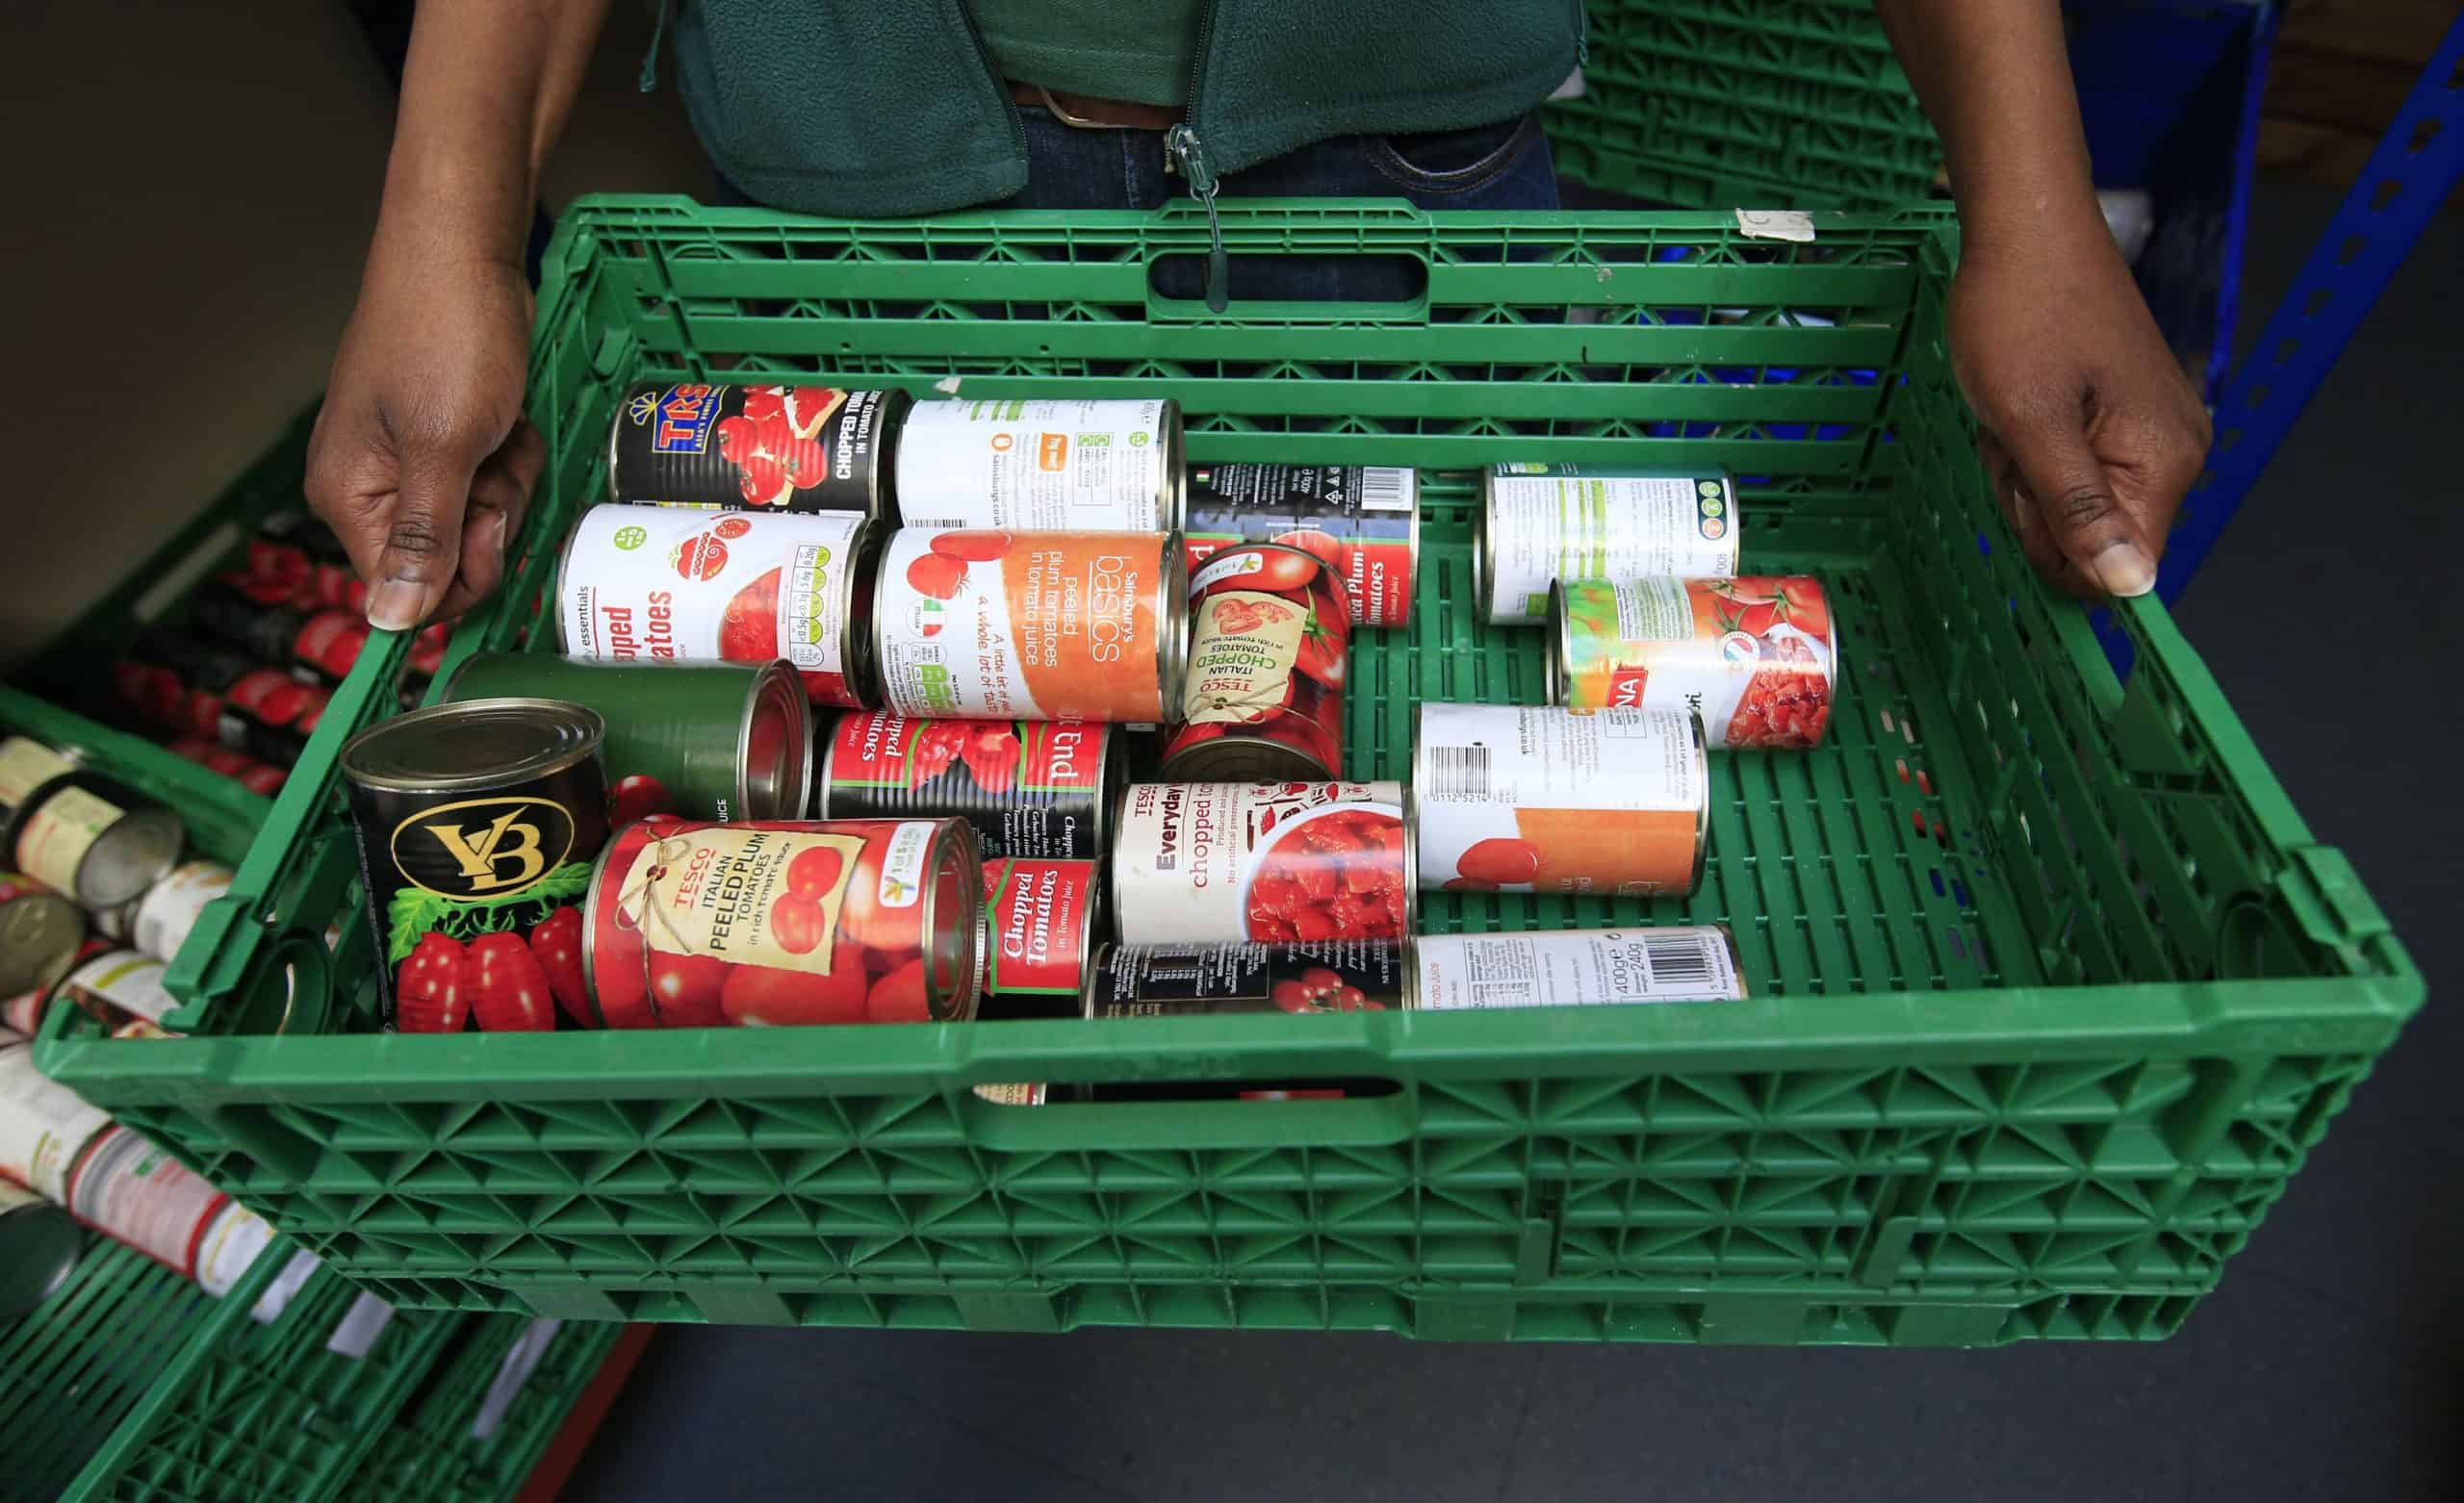 90 per cent of English councils have see rise in food bank use